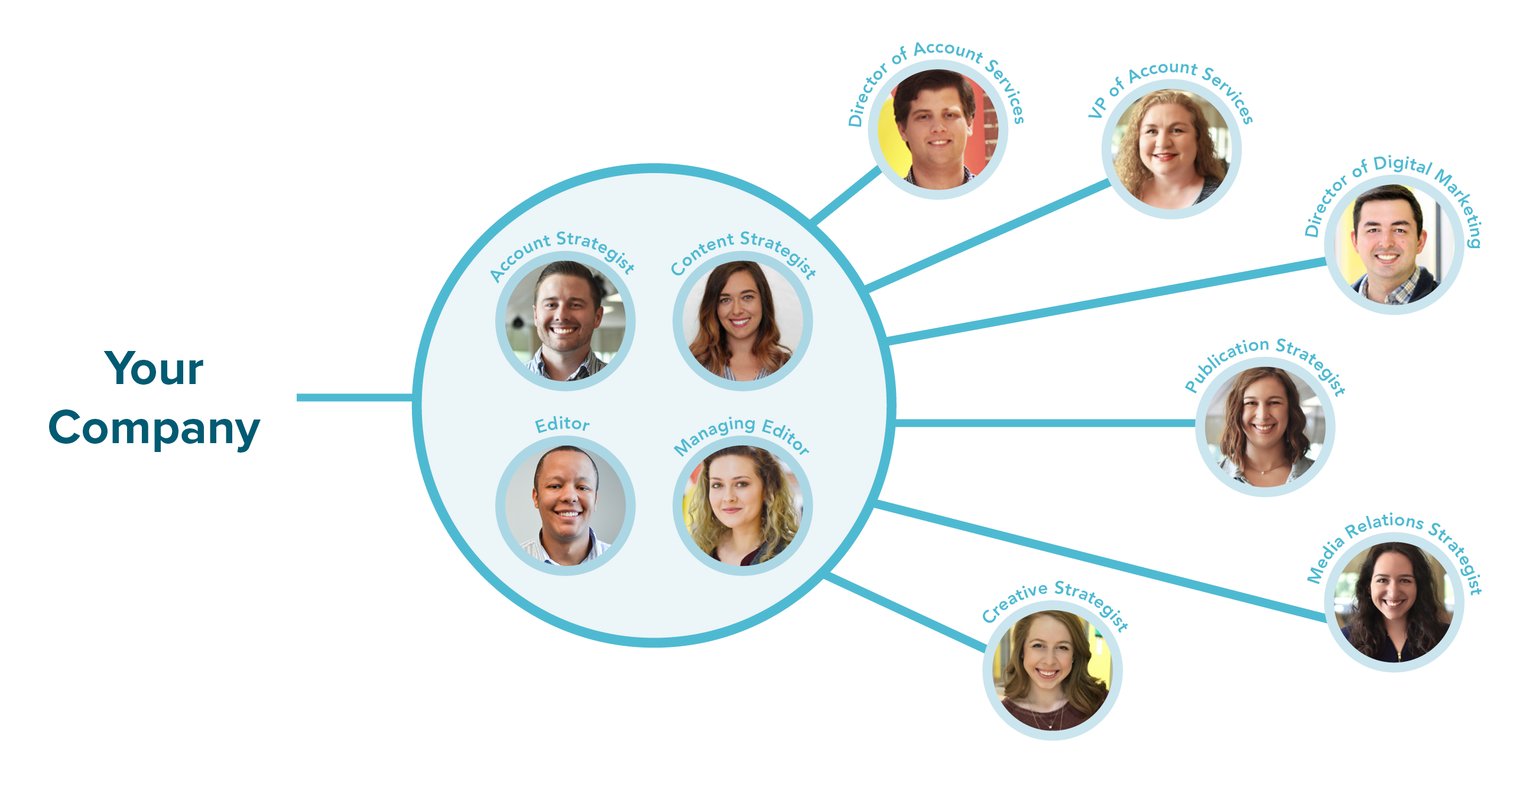 Influence & Co. team structure. Account strategist, content strategist, editor, managing editor, director of account services, VP of account services, director of digital marketing, publication strategist, media relations strategist, creative strategist.